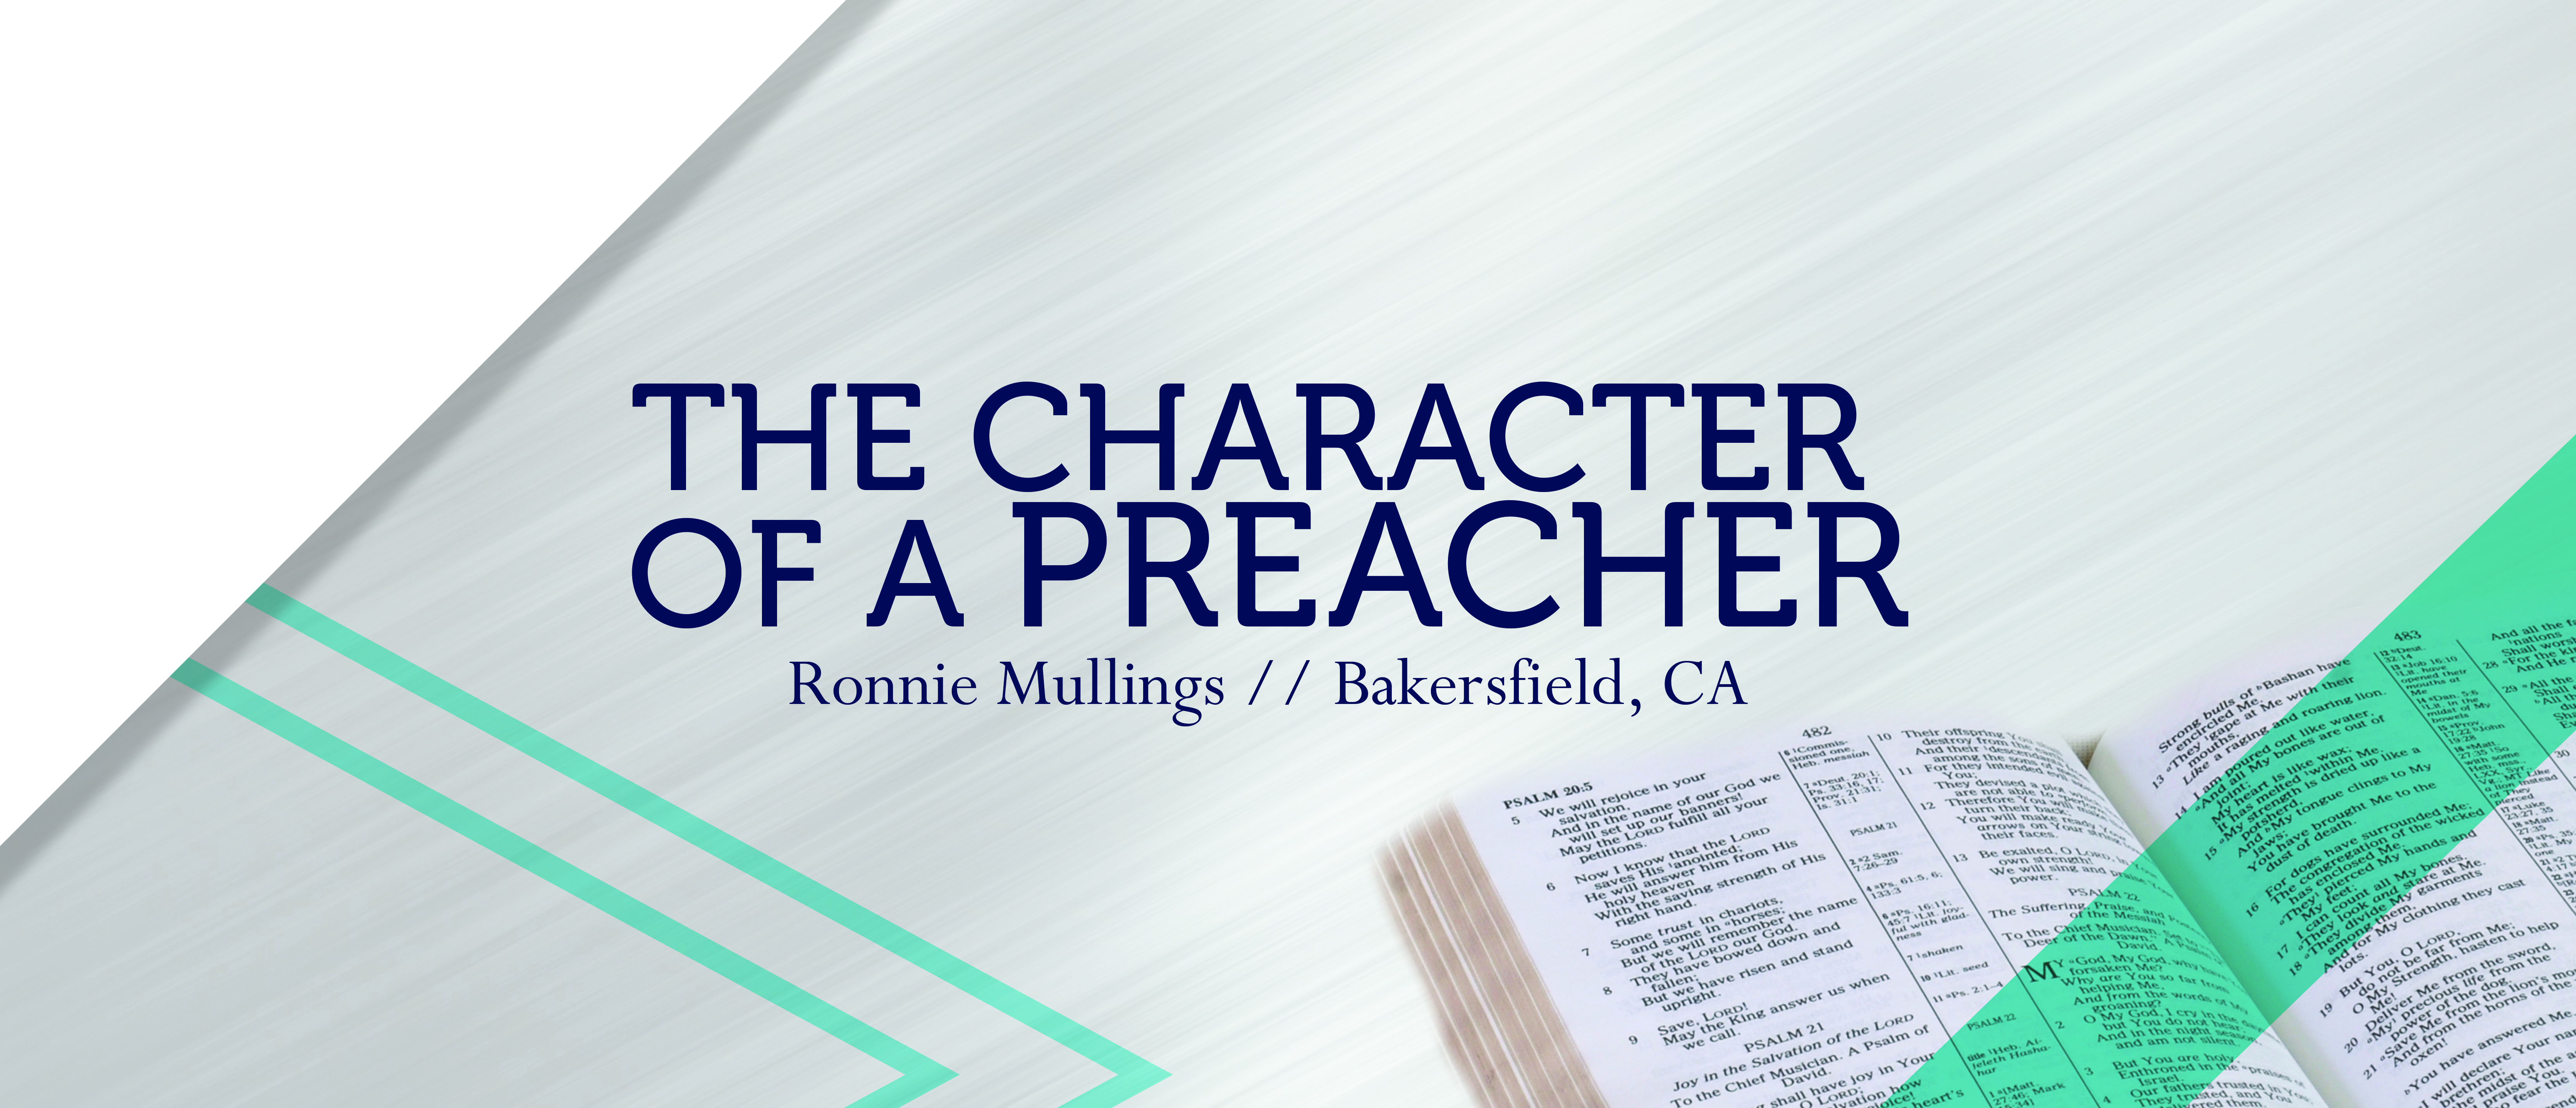 The Character of A Preacher